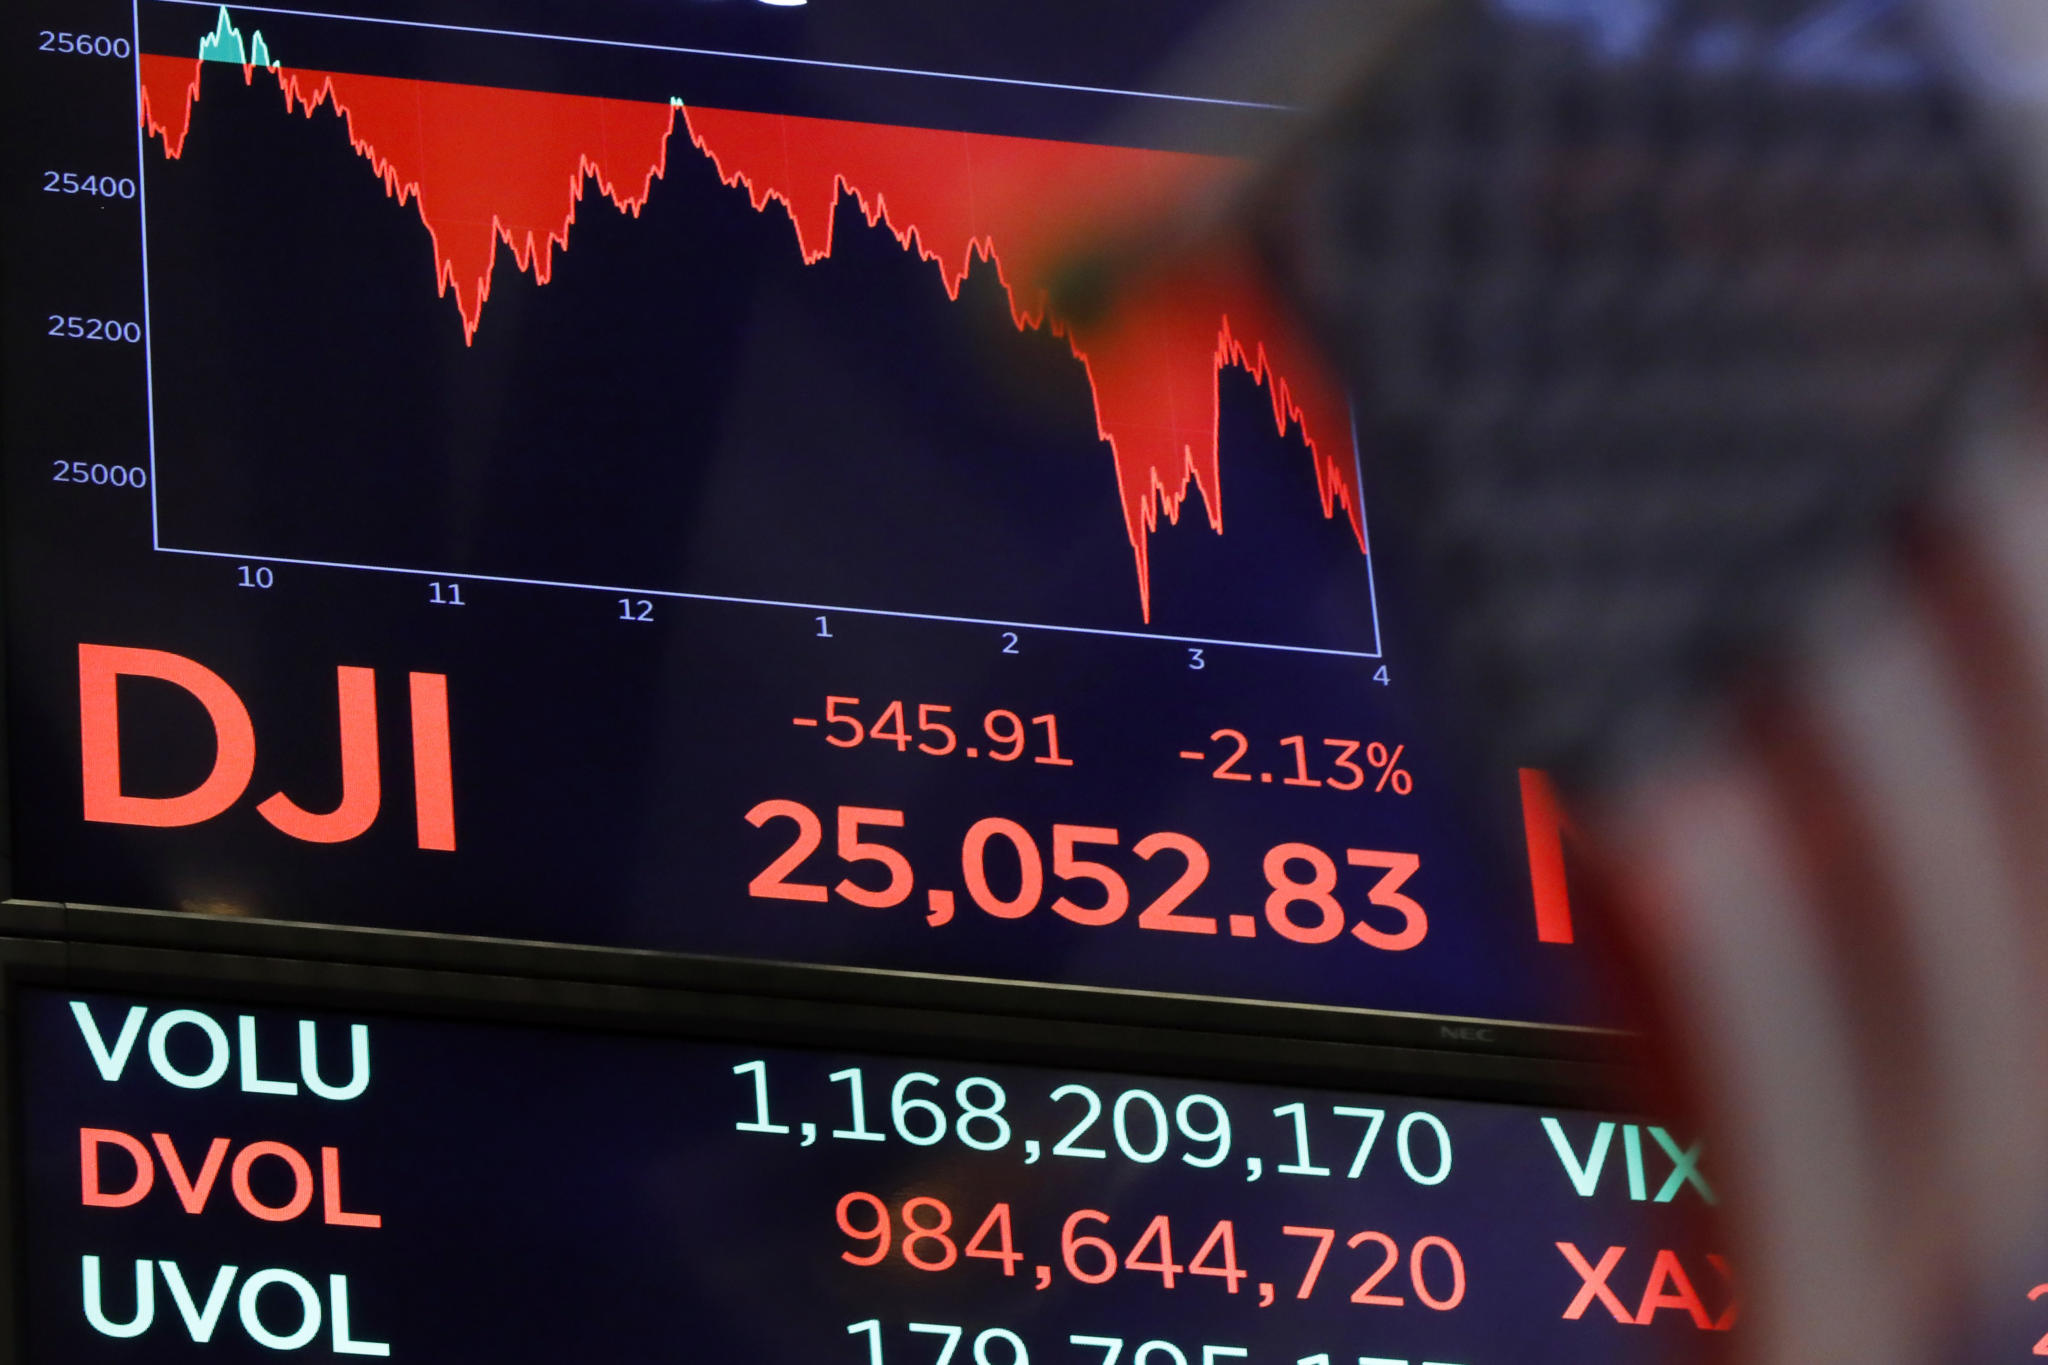 A board above the floor of the New York Stock Exchange shows the closing number for the Dow Jones industrial average, Thursday, Oct. 11, 2018. The DJIA fell 545 points, or 2.1 percent, to 25,052.83. (AP Photo/Richard Drew)